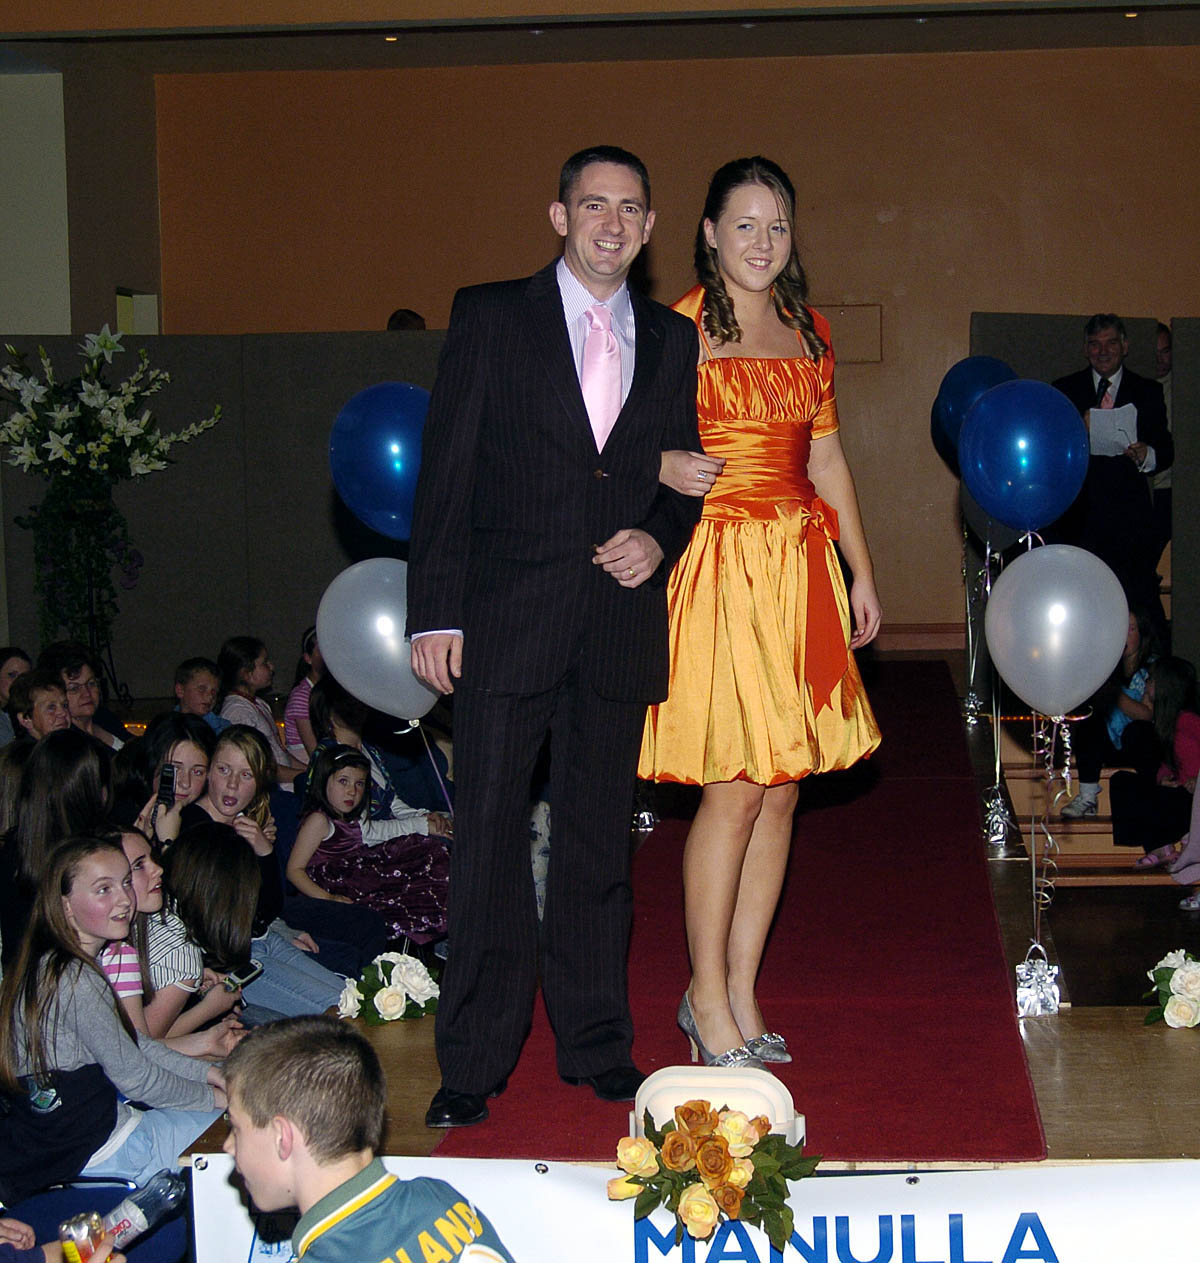 Pictured in the Resource centre in Balla at a Fashion Show organised by Manulla Football Club Youth Council to raise funds for Manulla Football Club. Outfits for the night were supplied by Next Step, Elverys, Adams at Shaws, Beverley Hills and Padraic McHales. John Henley and Aoife Brennan   Photo  Ken Wright Photography 2007 No 399